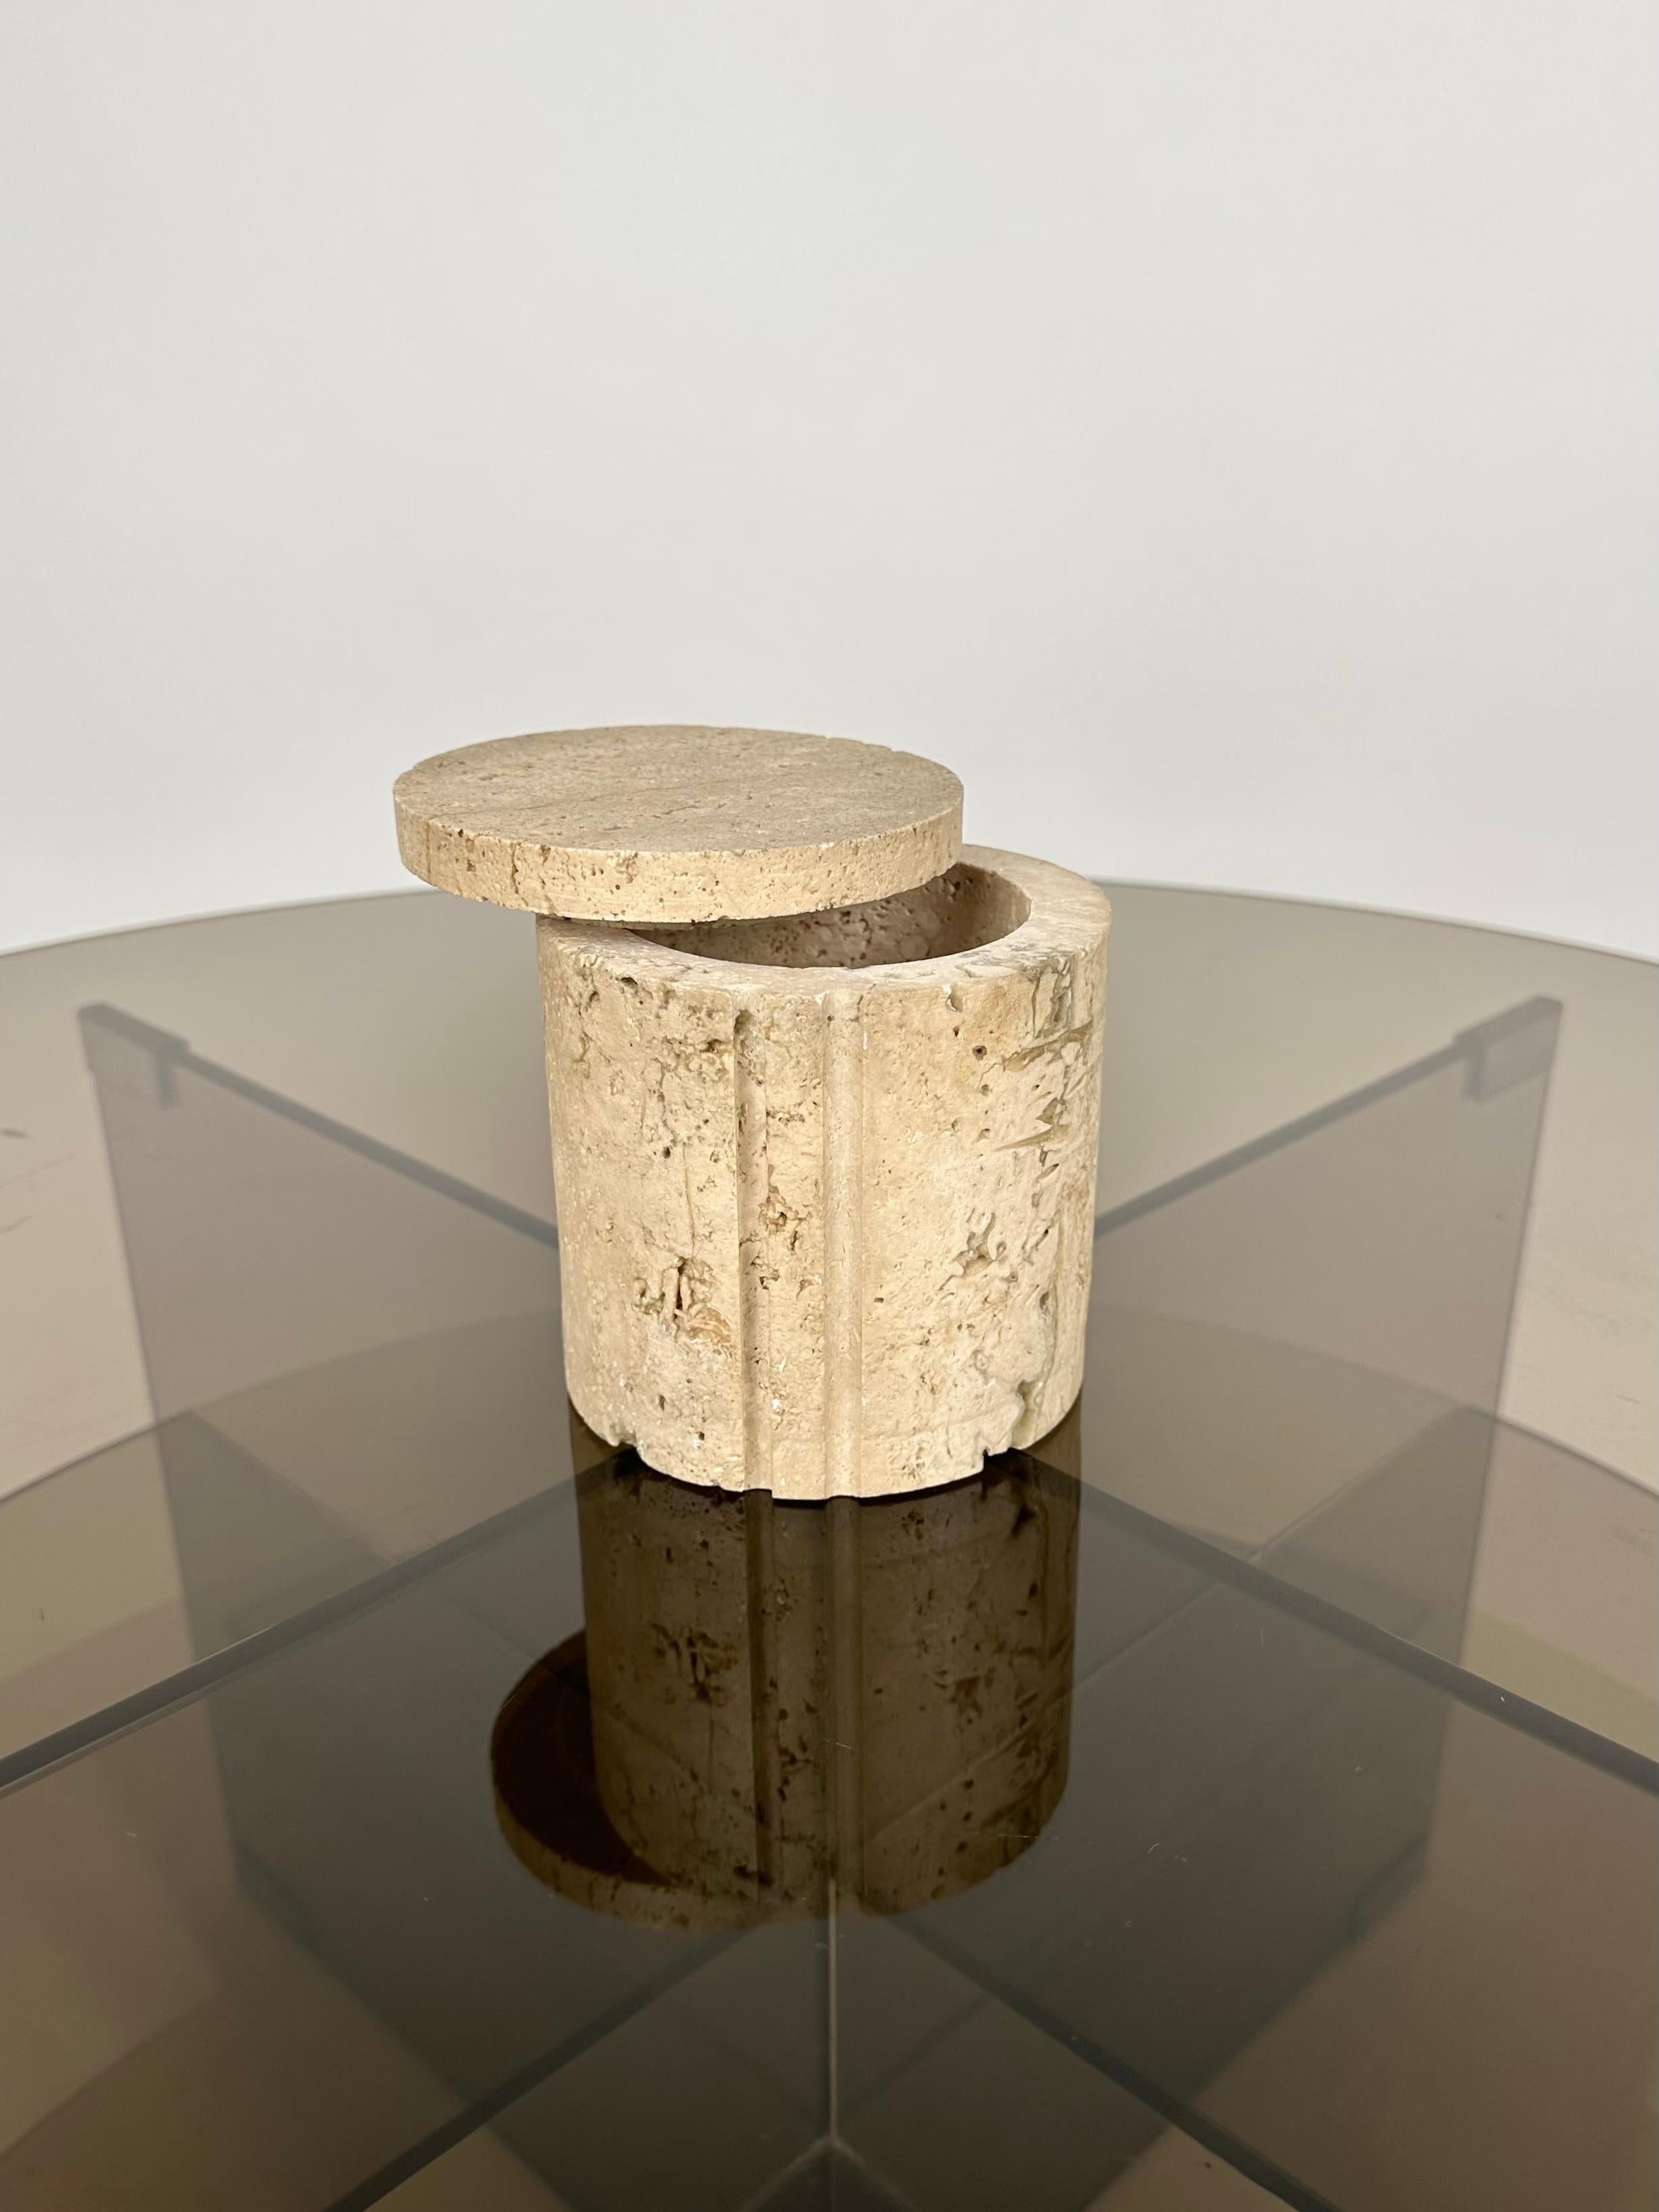 Italian Midcentury Decorative Box in Travertine by Fratelli Mannelli, Italy, 1970s For Sale